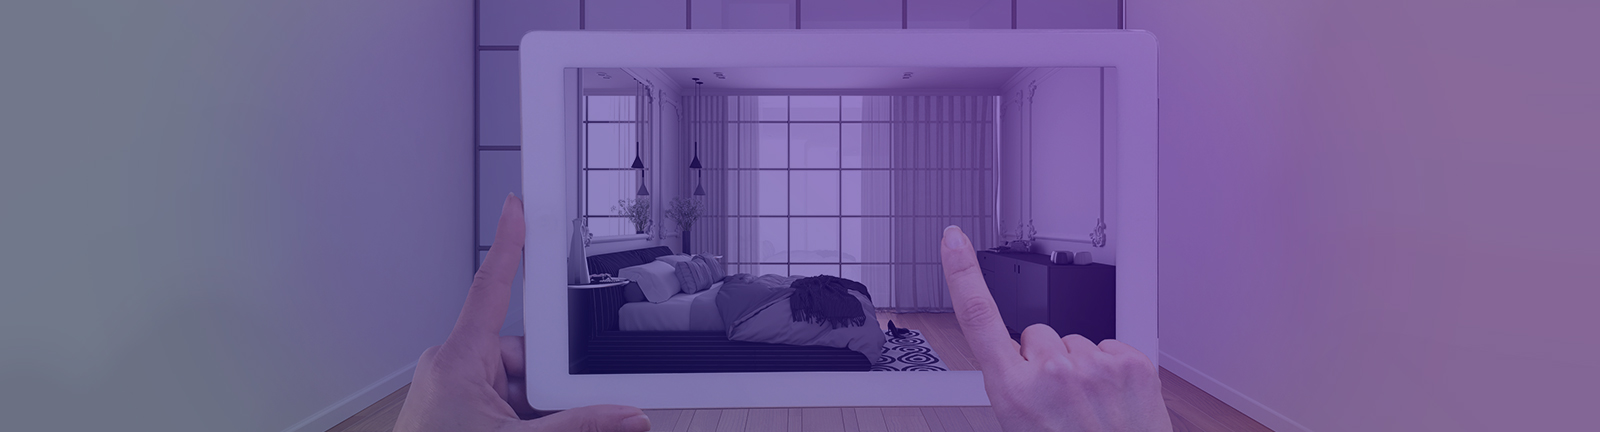 Augmented reality – The retail sector’s next game changer?